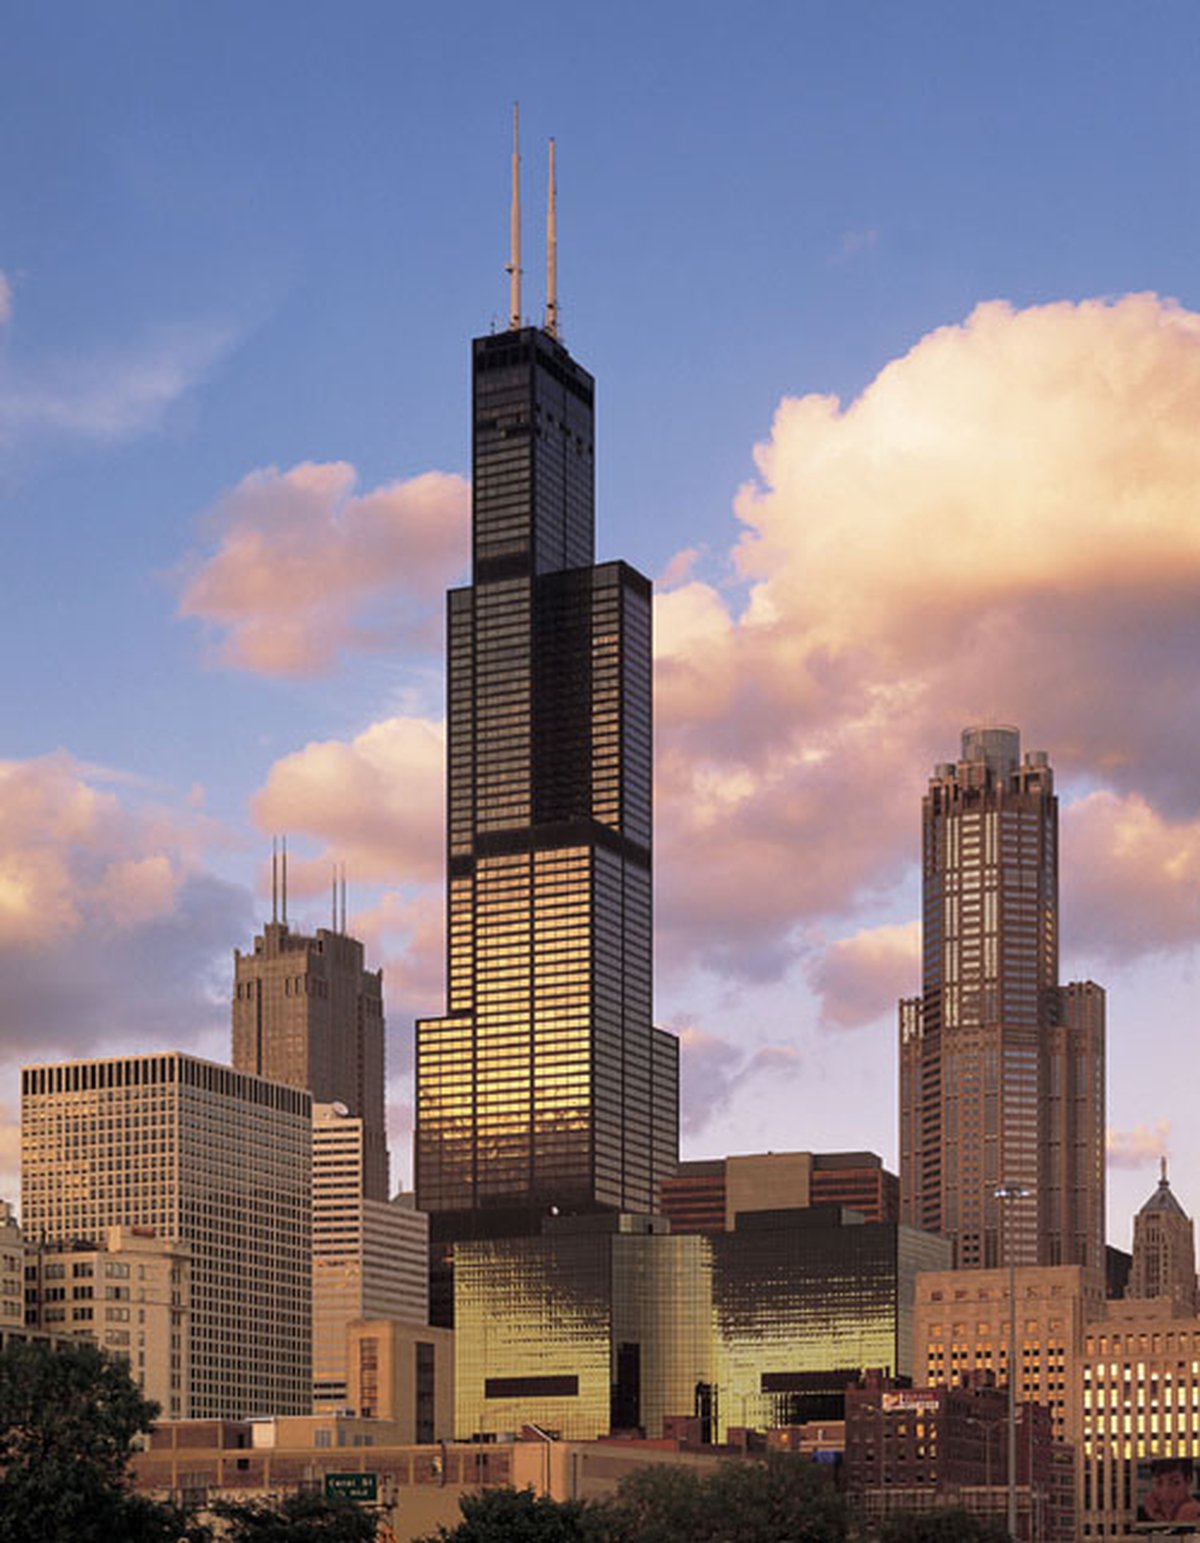 A picture of Willis Tower